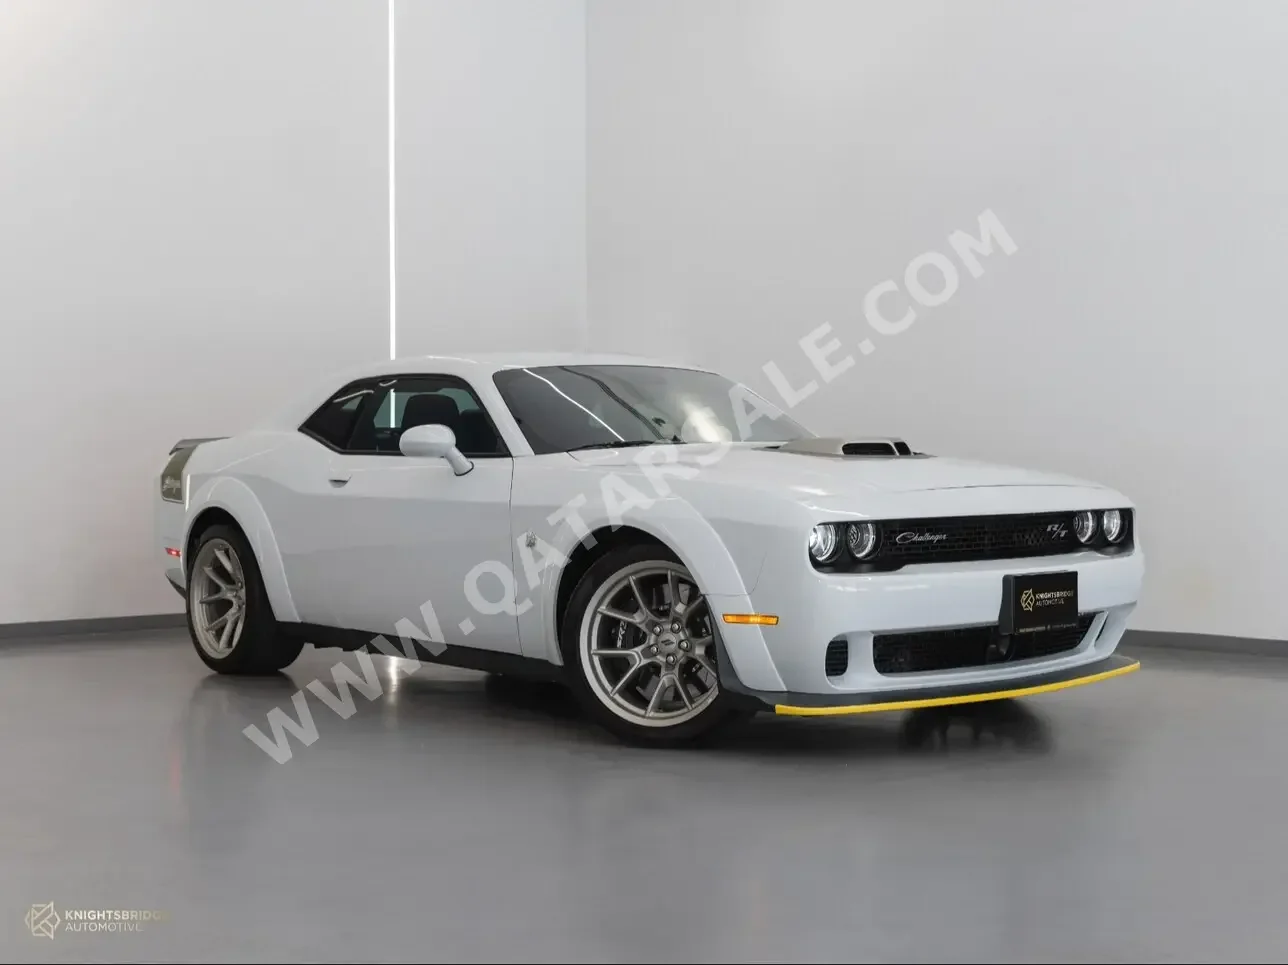  Dodge  Challenger  RT Scate Pack Swinger  2023  Automatic  1,100 Km  8 Cylinder  Rear Wheel Drive (RWD)  Coupe / Sport  White  With Warranty